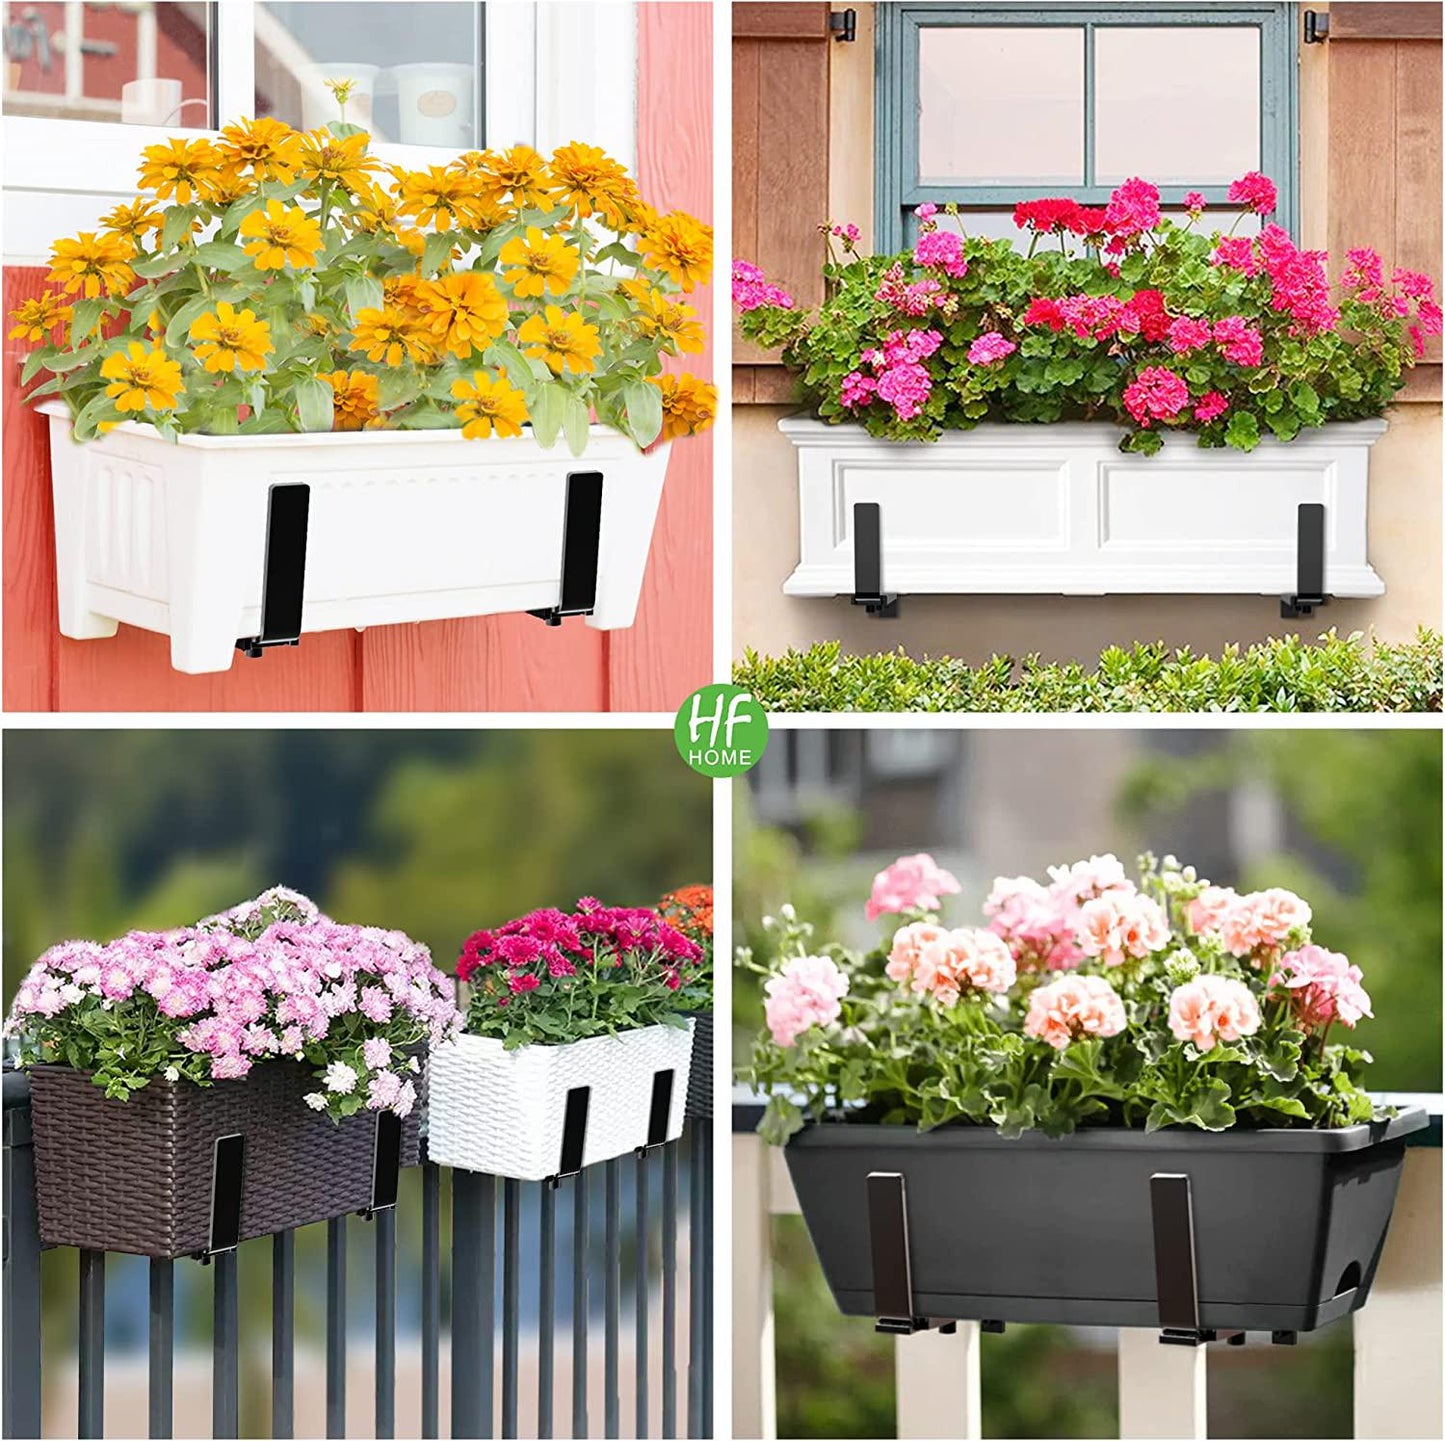 HFHOME 4 PCS Adjustable Planter Box Bracket (6 to 12.5 Inches) for Flower Box Holders, Window Boxes Planters Hooks, Heavy Duty Wall Mount Holder - Black